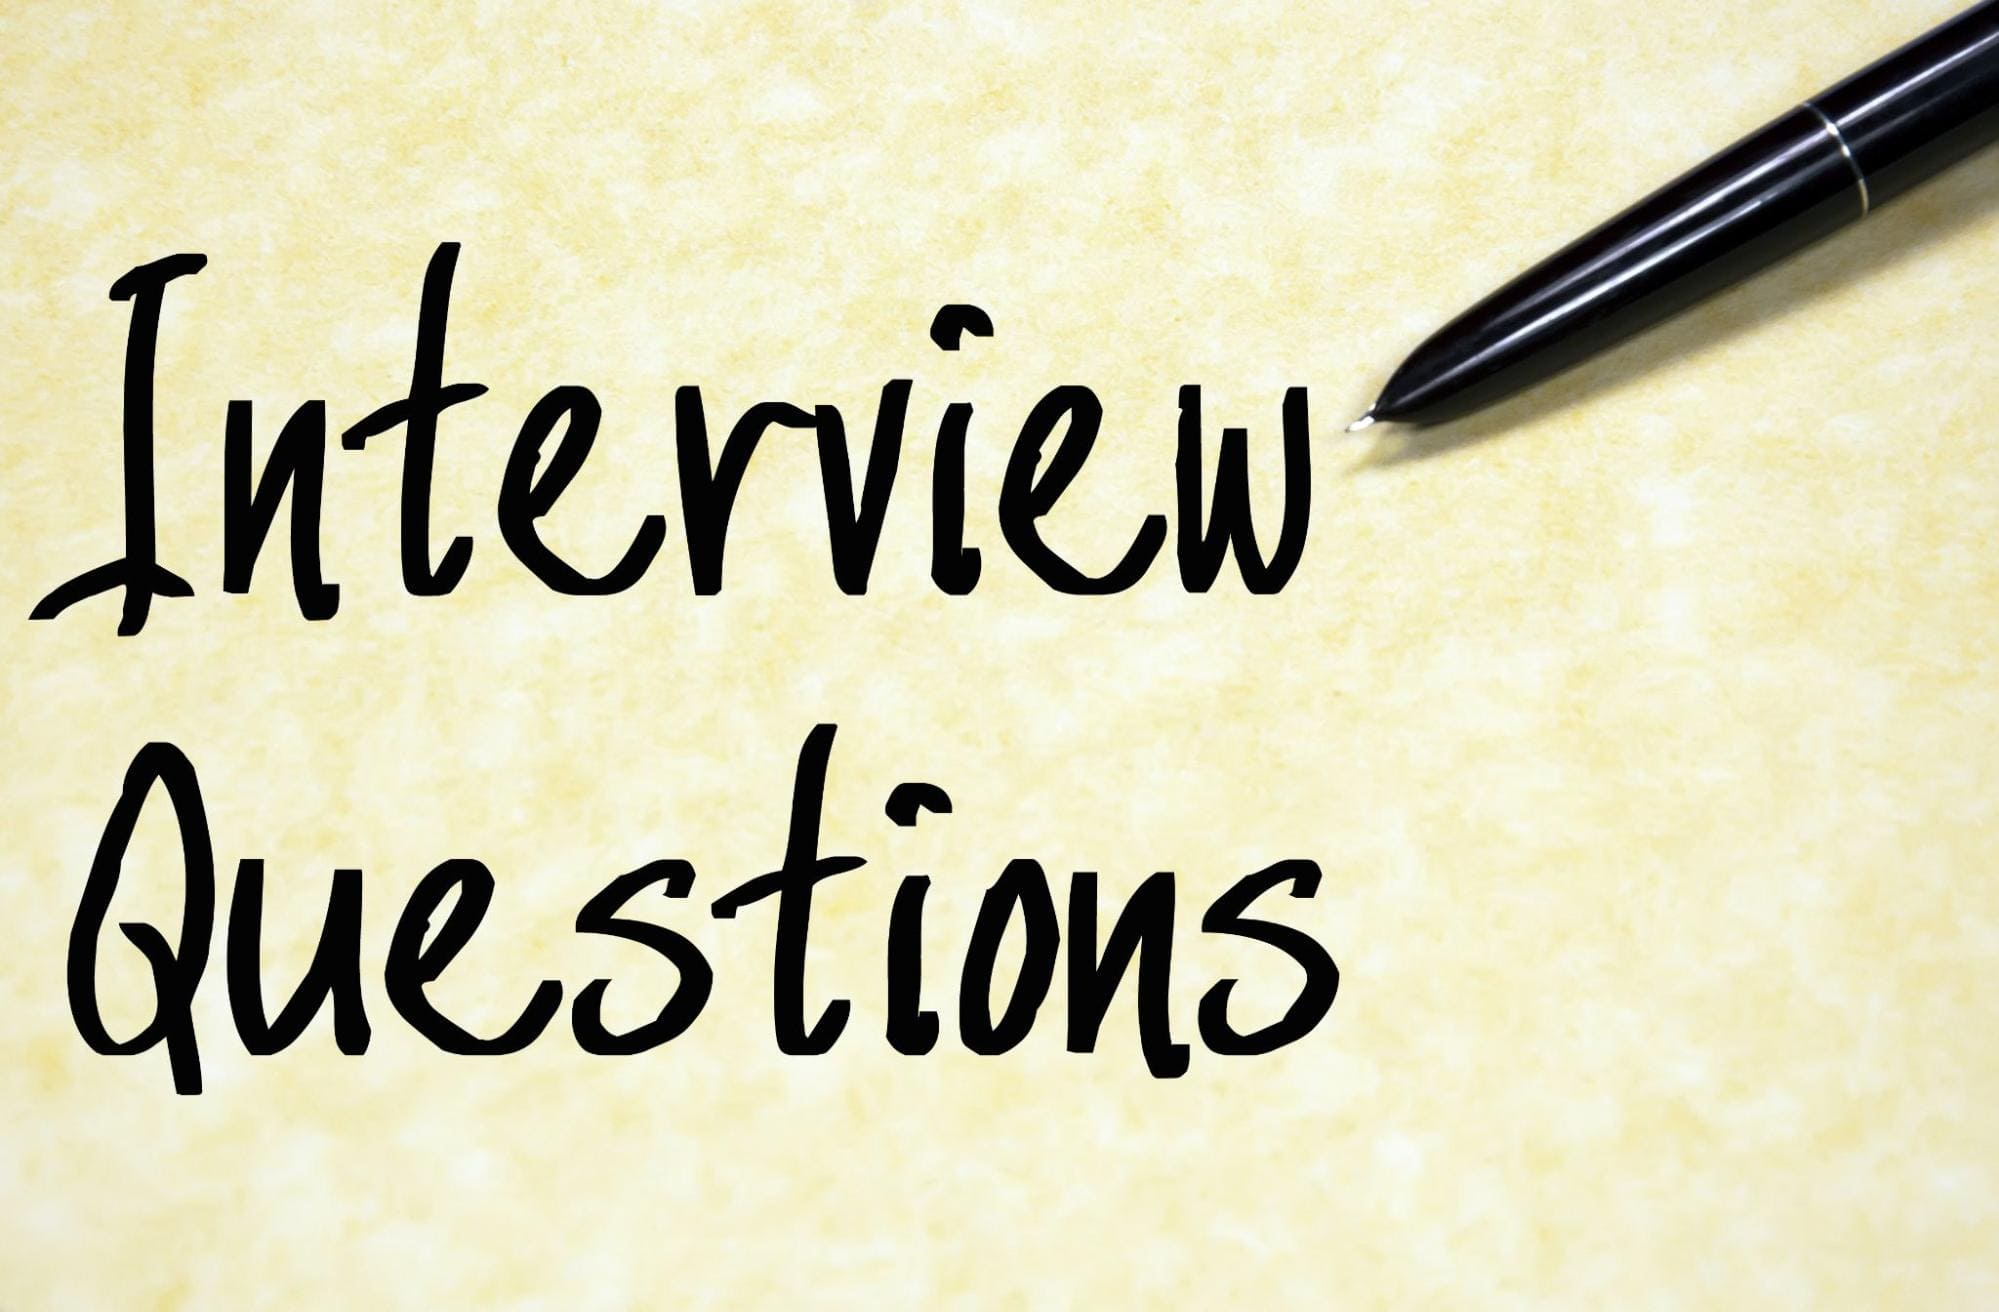 Latest interesting interview questions in 2023